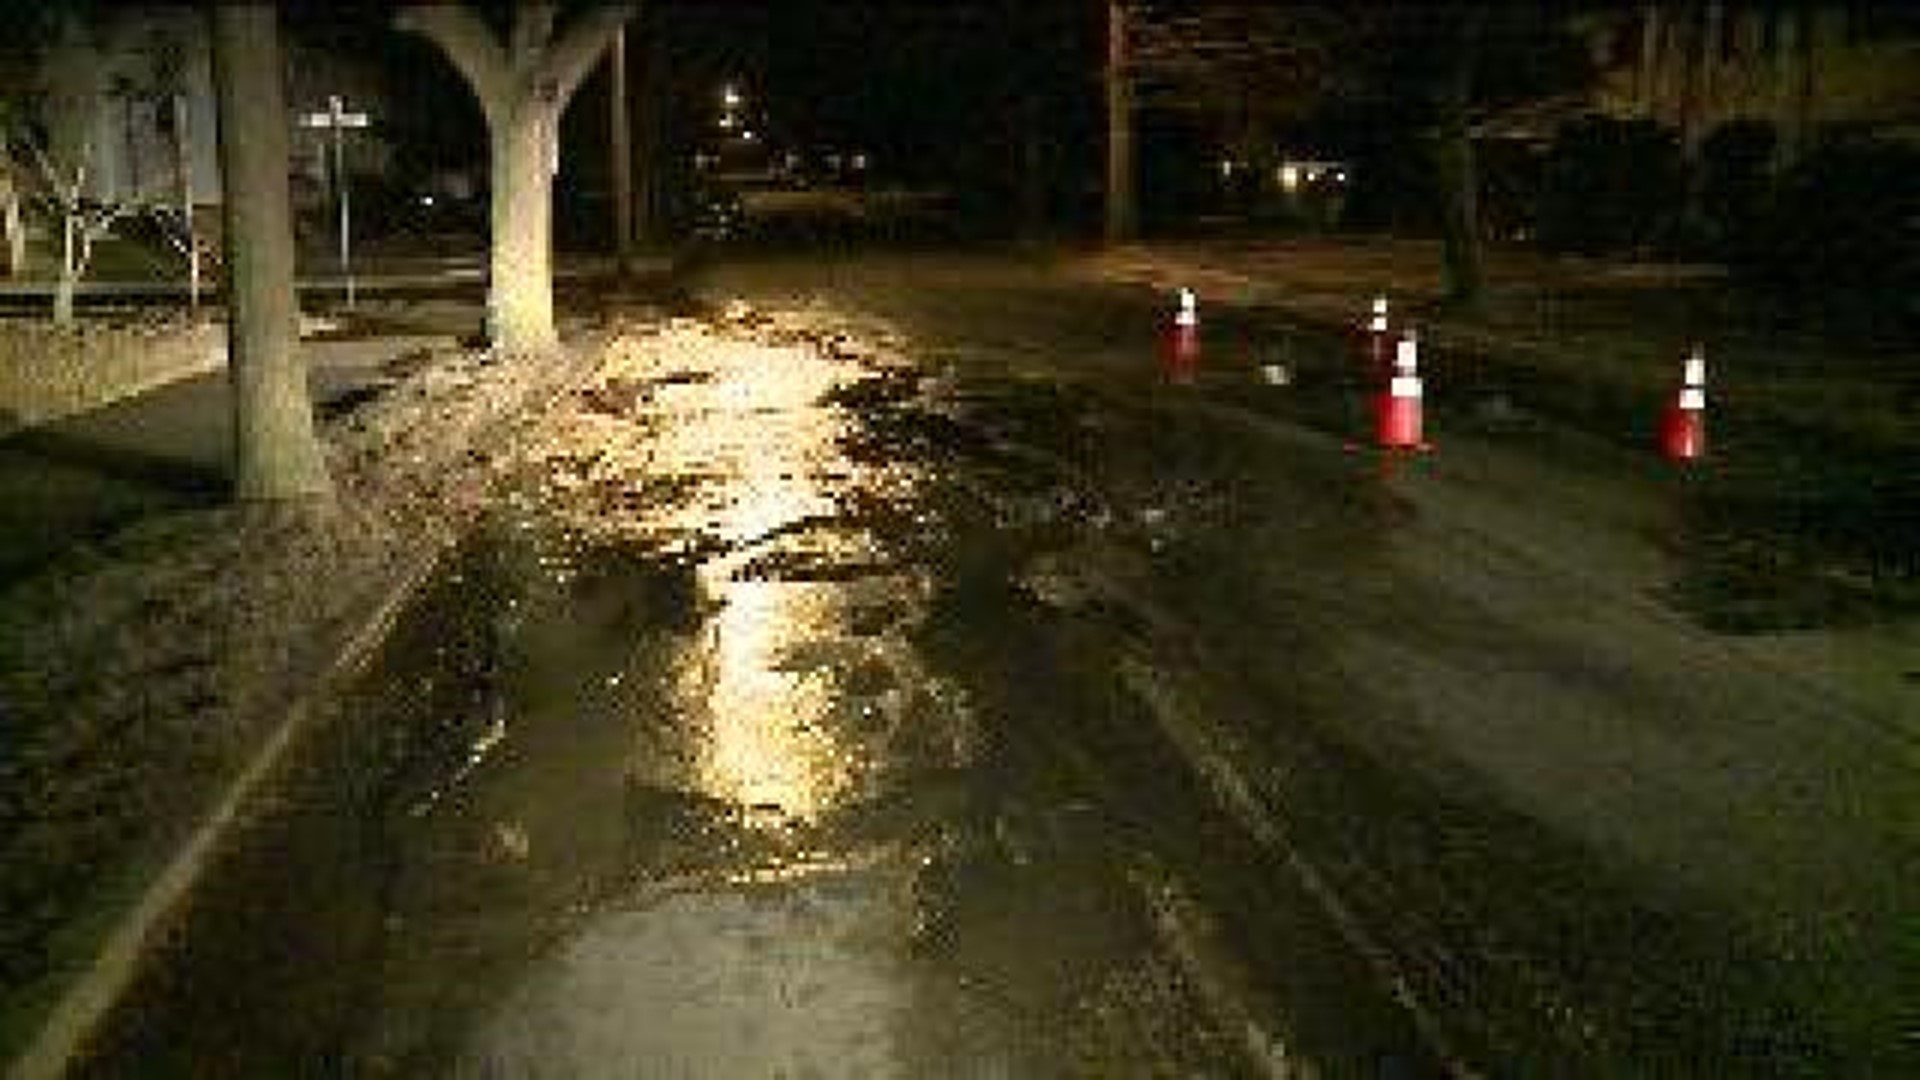 Kingston Homes, Businesses Affected by Water Main Break